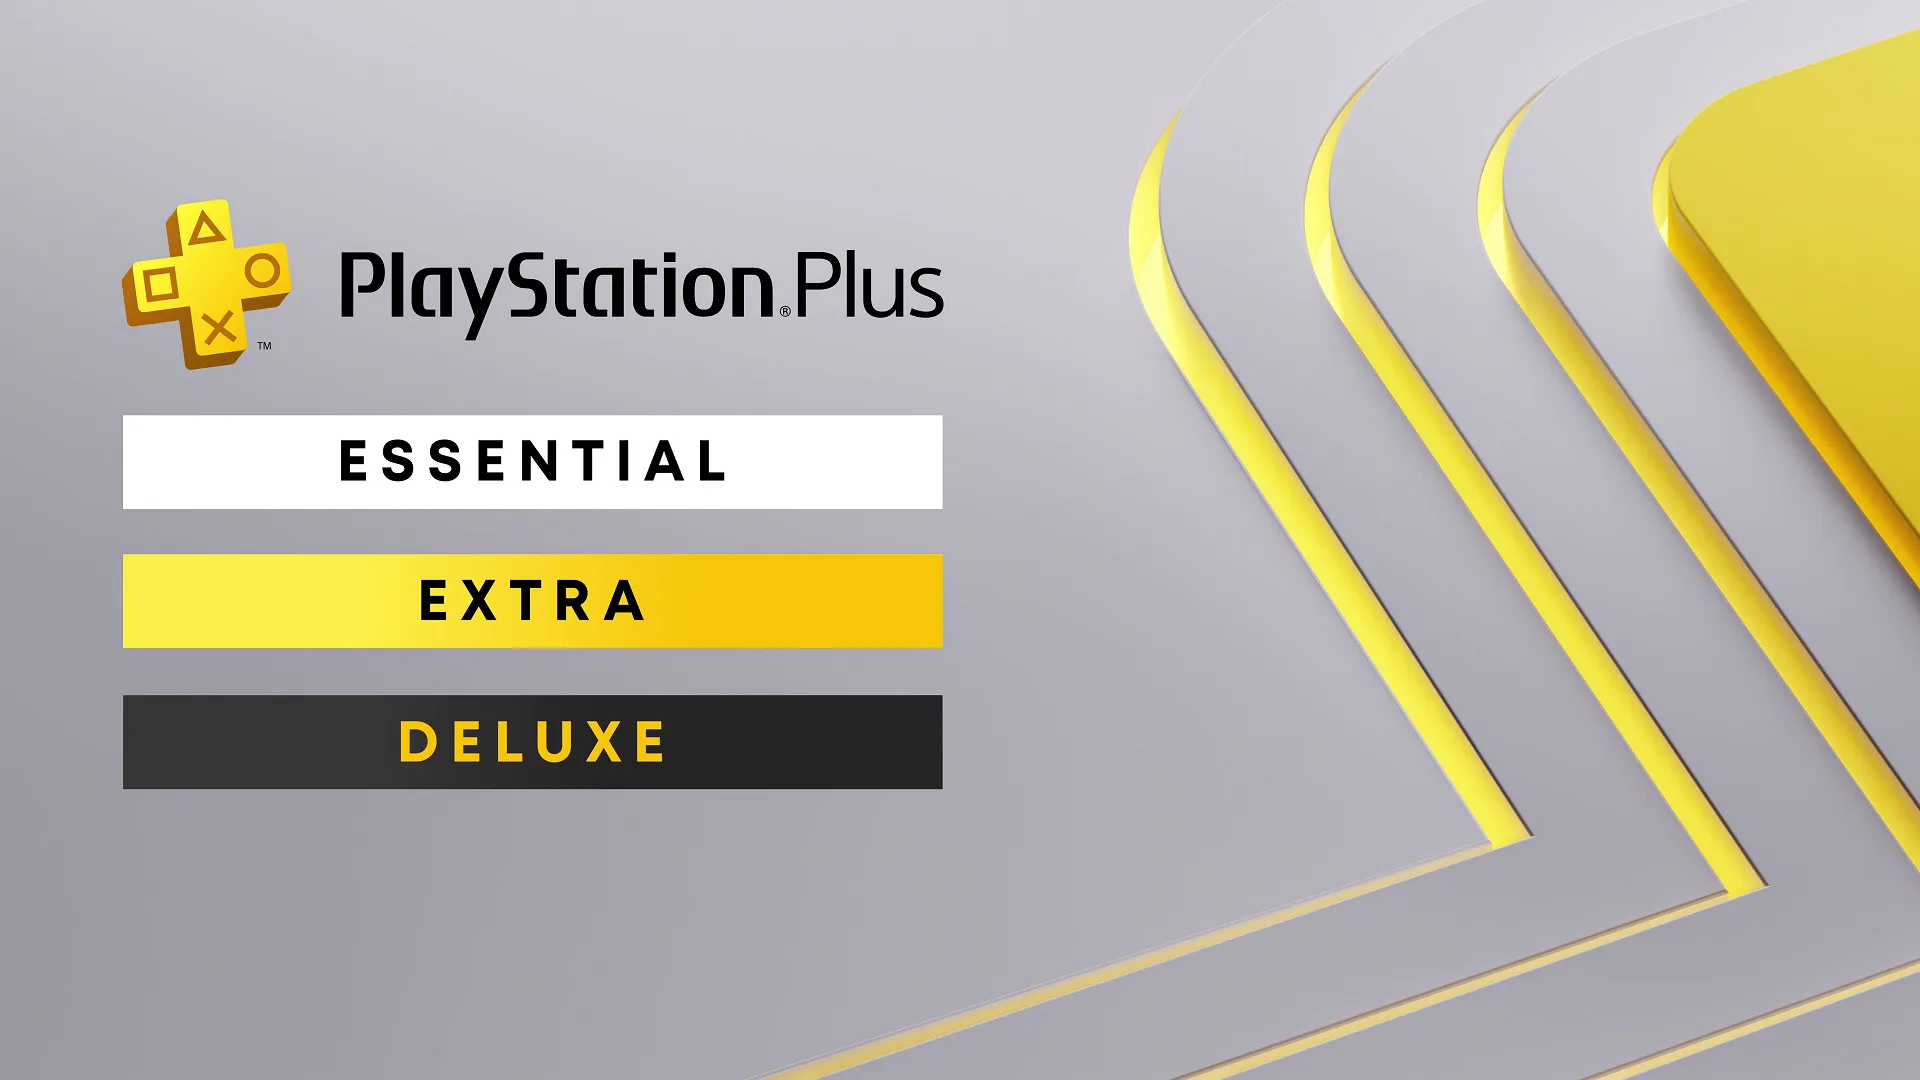 Sony raises PlayStation Plus prices by $40 extra like it's no big deal